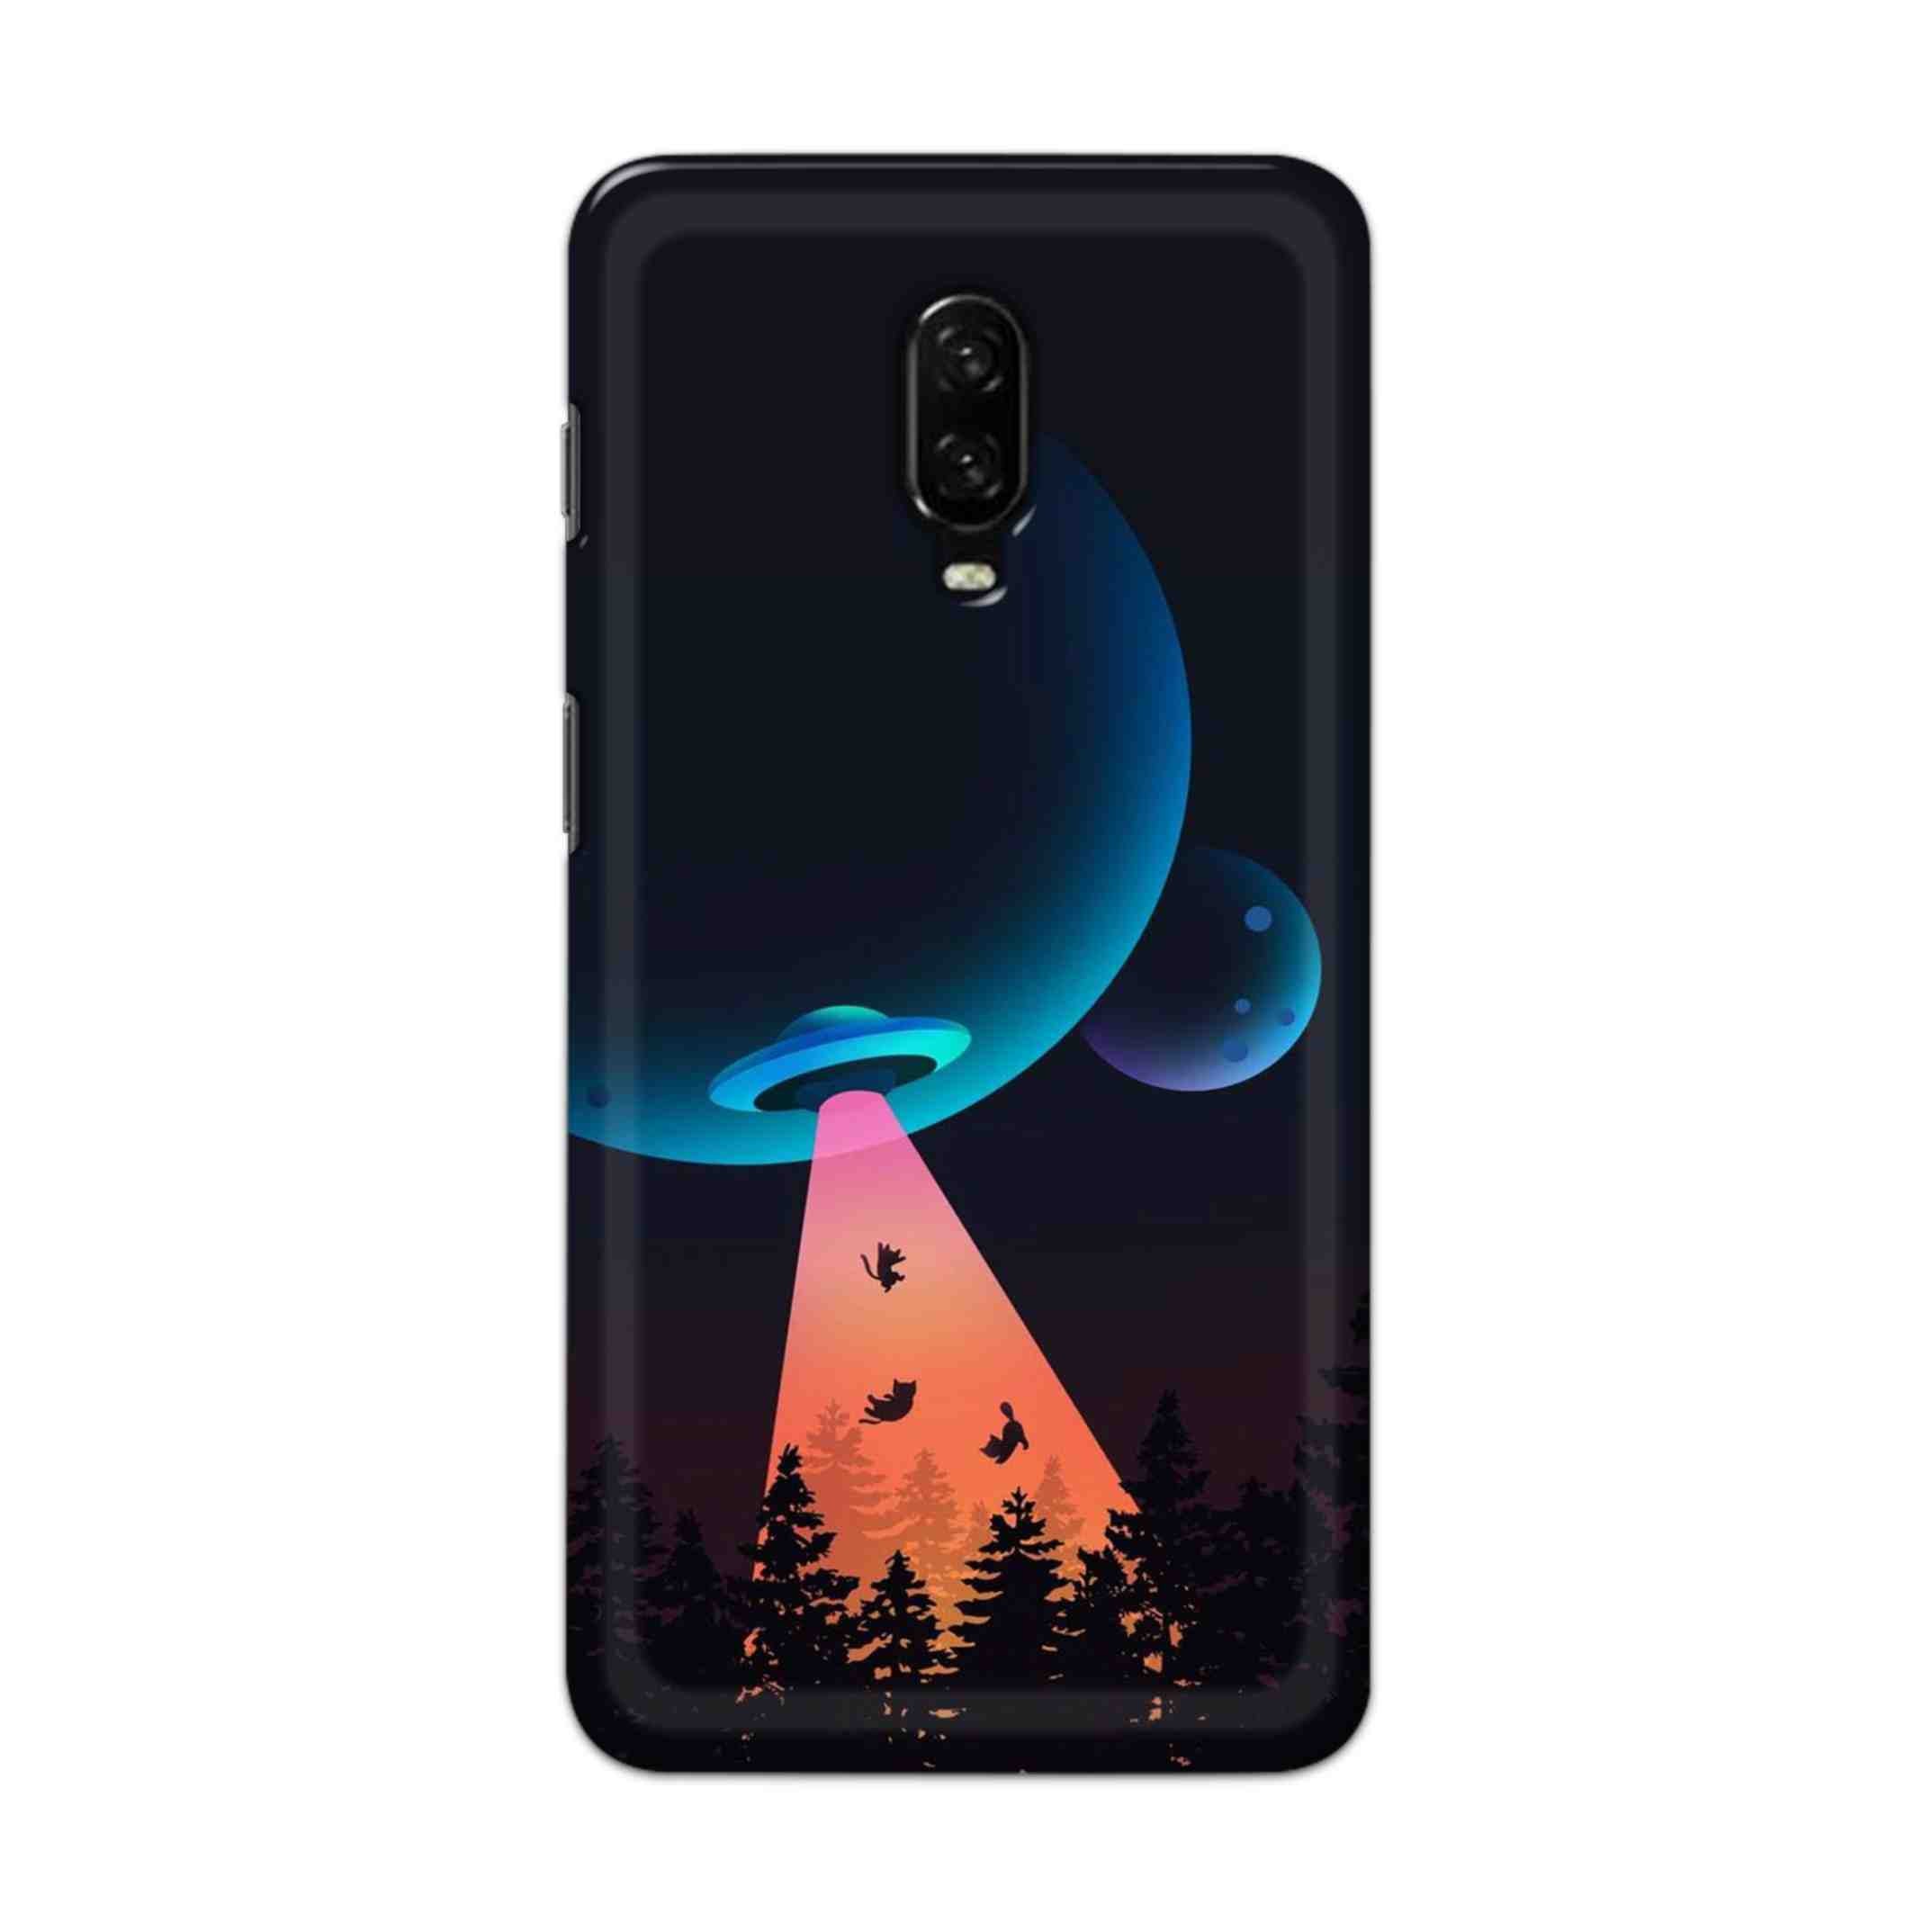 Buy Spaceship Hard Back Mobile Phone Case Cover For OnePlus 6T Online